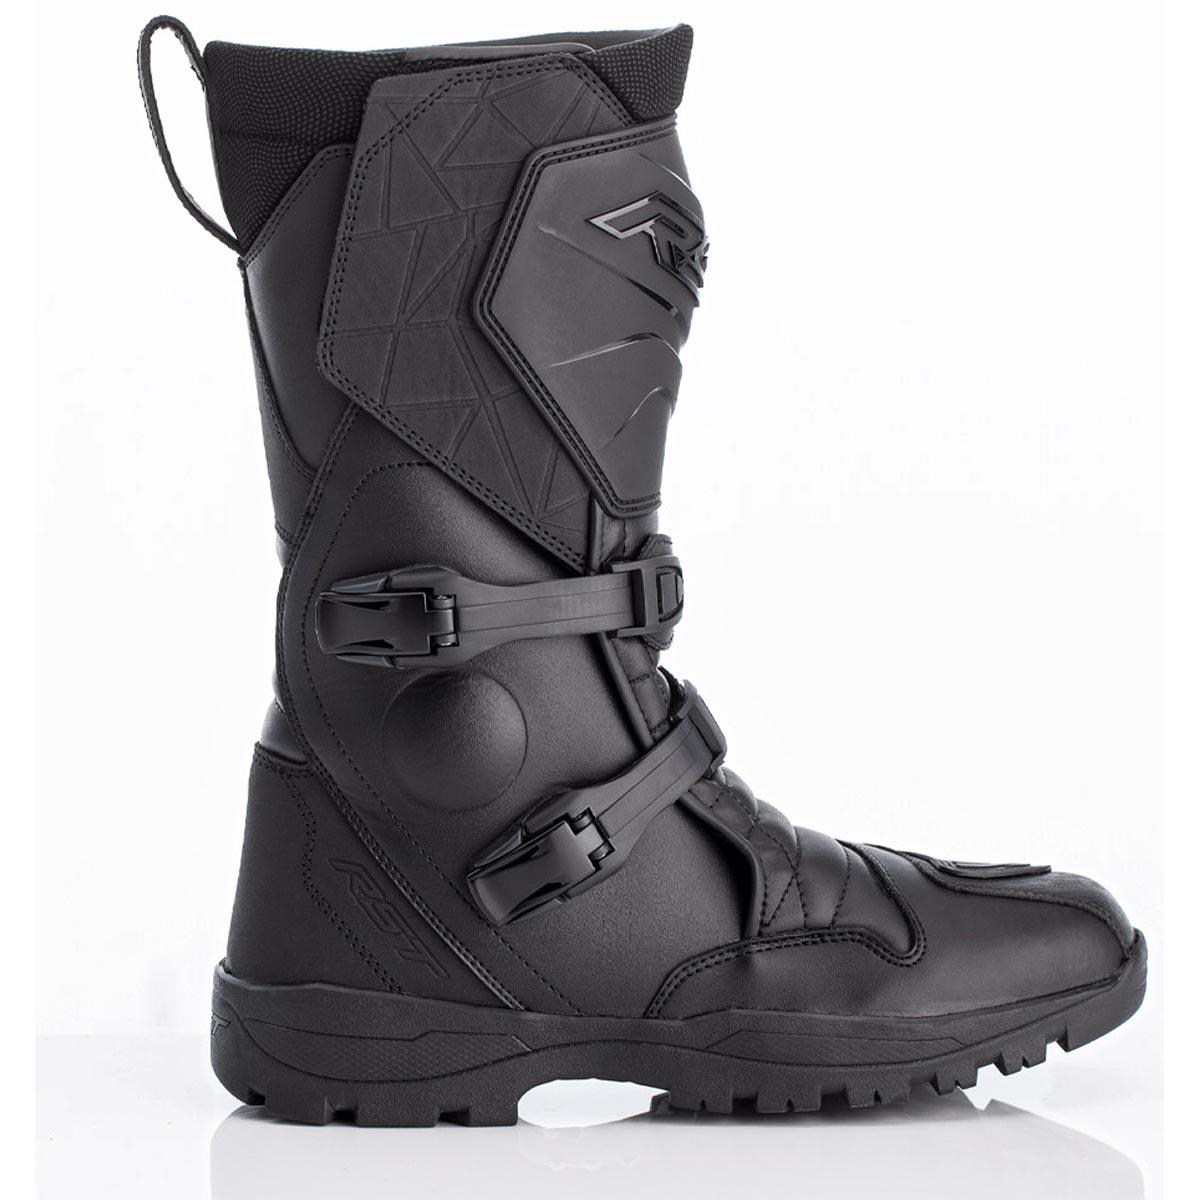 RST Adventure-X Boots CE WP  - Motorcycle Footwear